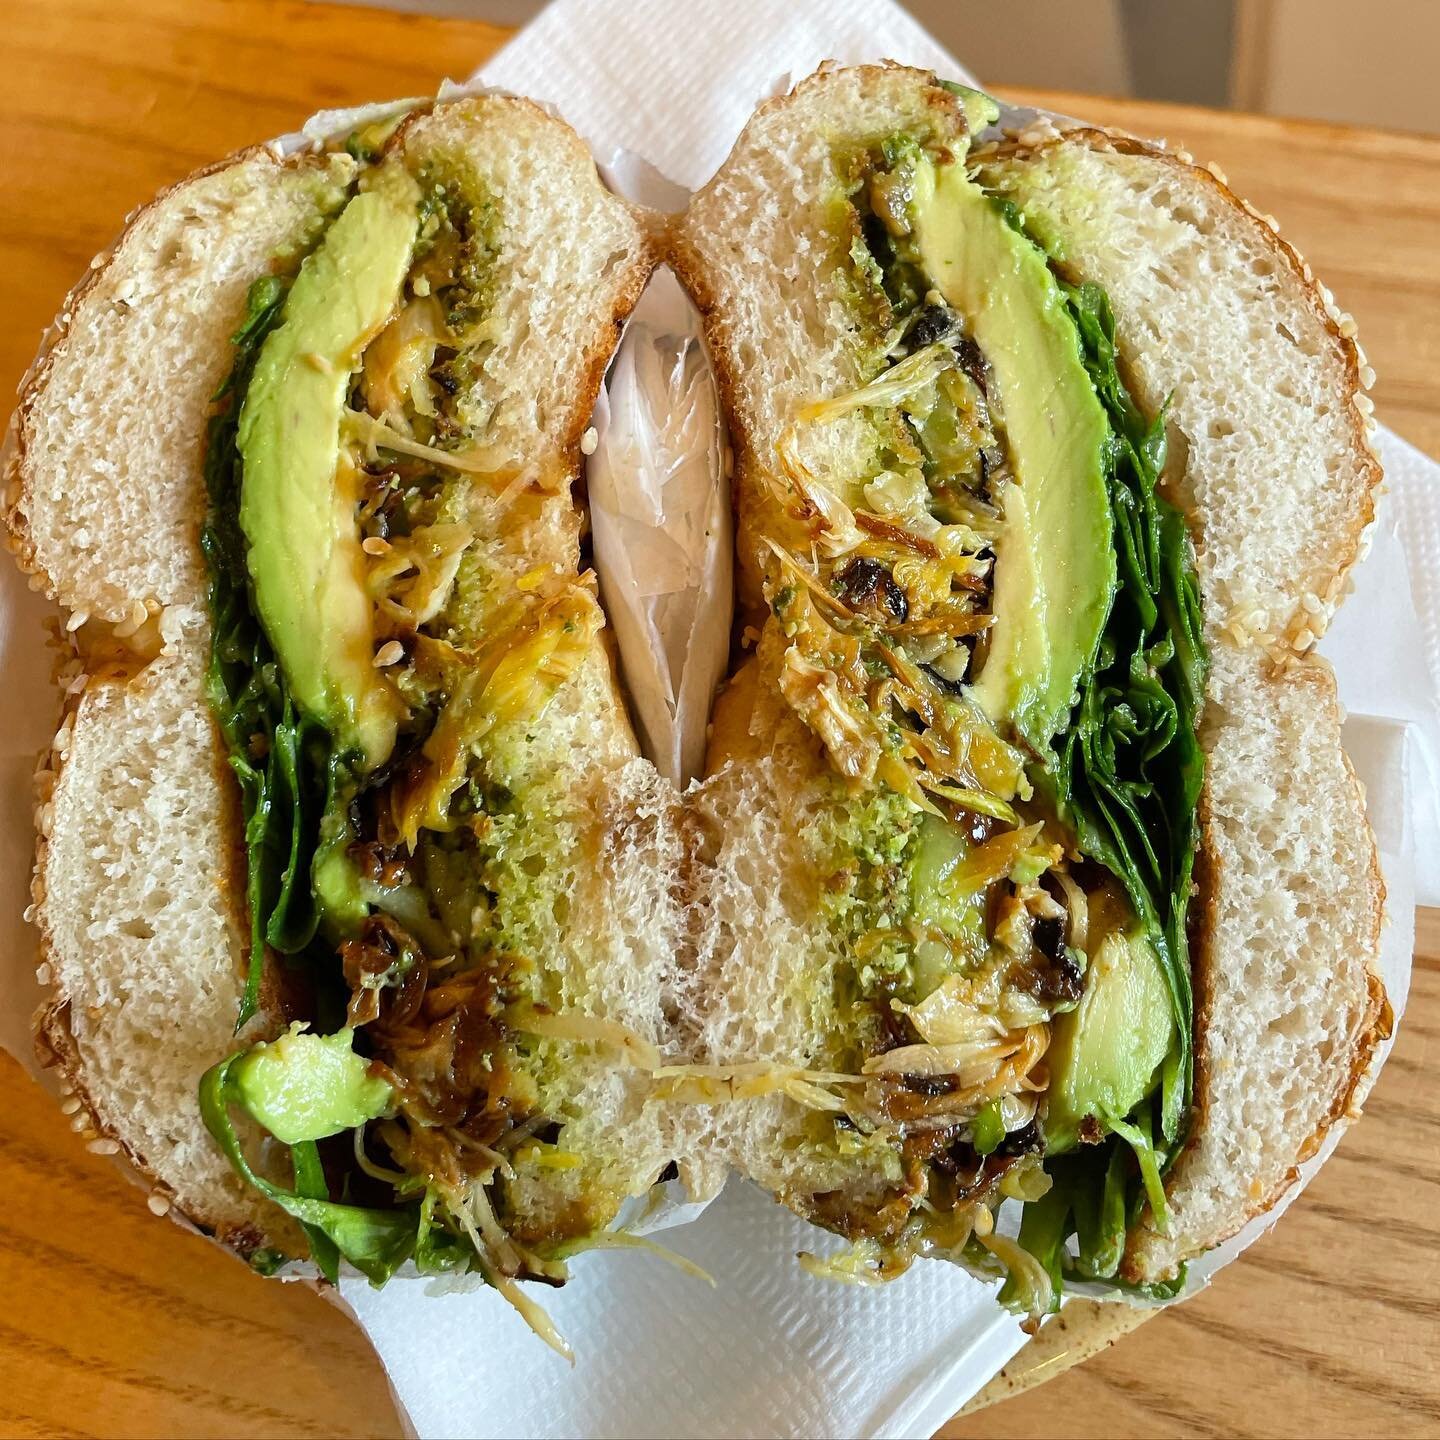 T H E G R E E N S

IYKYK (but if you don&rsquo;t, this is one of our signatures. Grilled fennel &amp; leek, avo, spicy picked cucumbers, wild rocket and basil pesto, as well as a healthy squeeze of lemon)

🥑 🌿 🥒 🚀 🍋 🌶 etc&hellip;

#bagels #cape